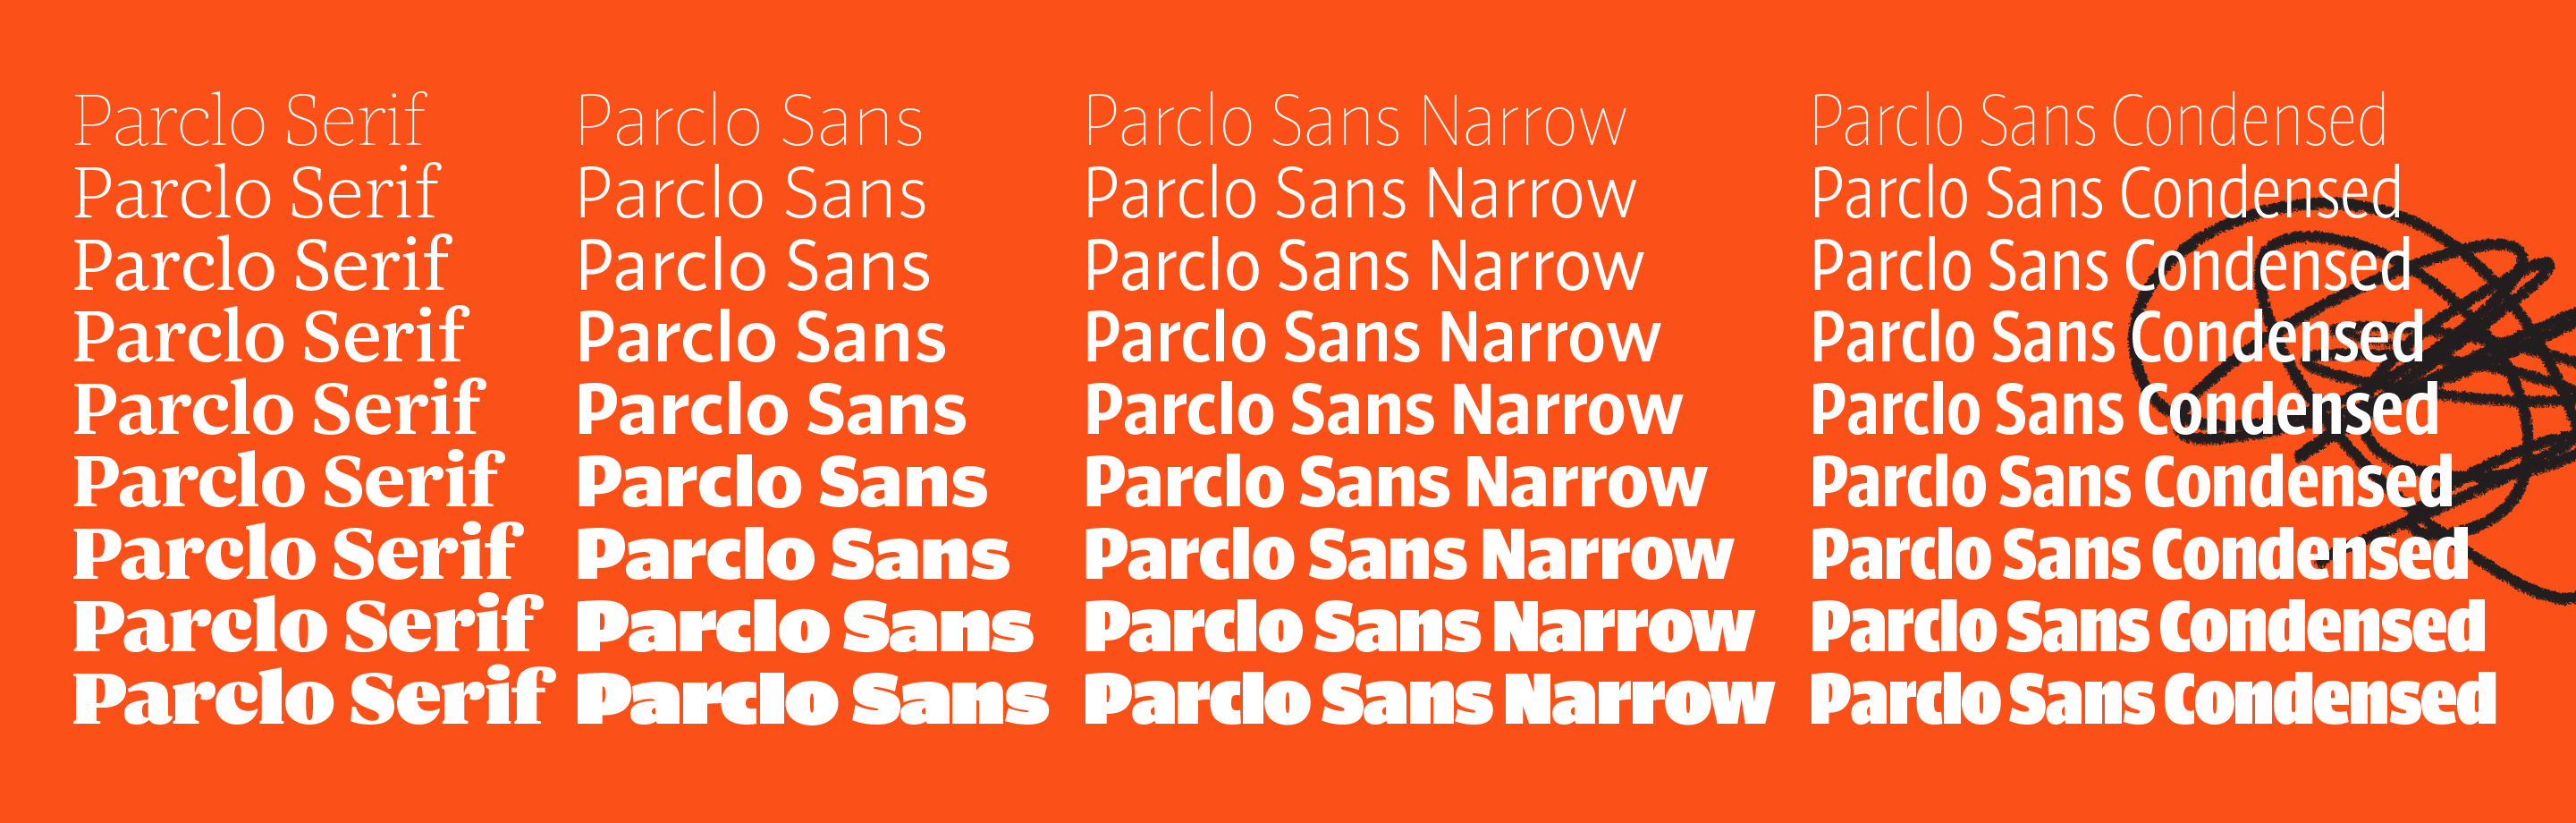 <b class="accent">FIG. 11 — </b> The full family of Parclo Serif and Parclo Sans. 